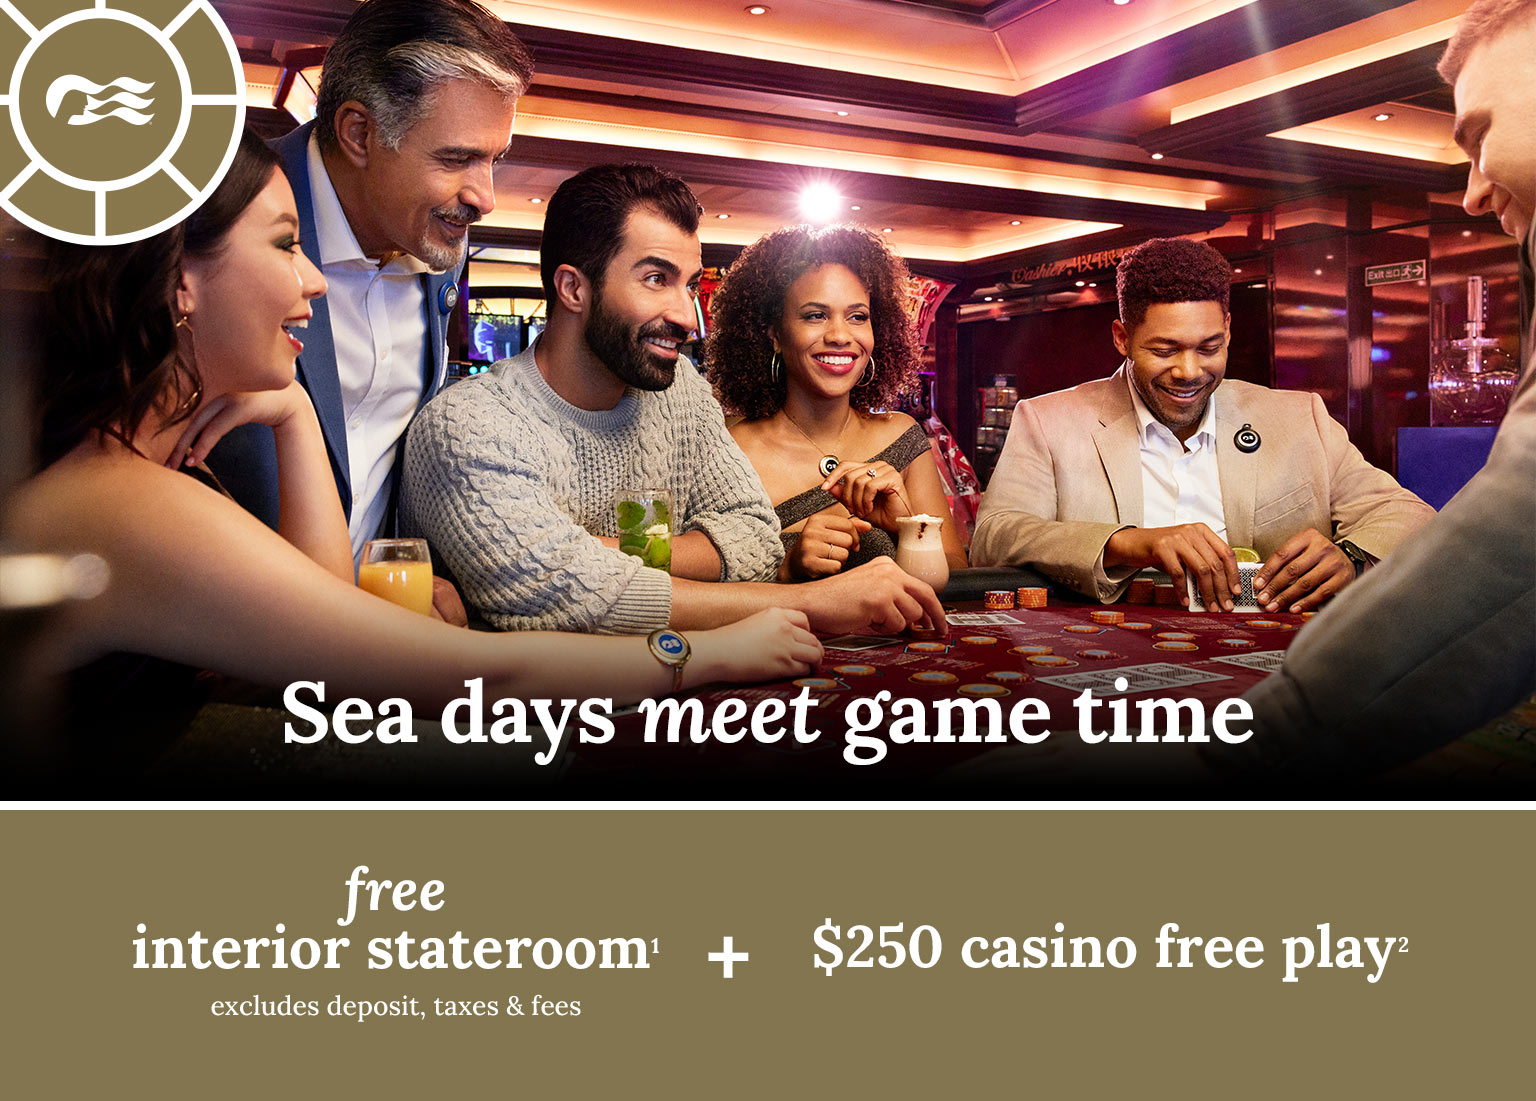 Group of people playing poker. free interior stateroom + $250 casino free play. Click here to book.